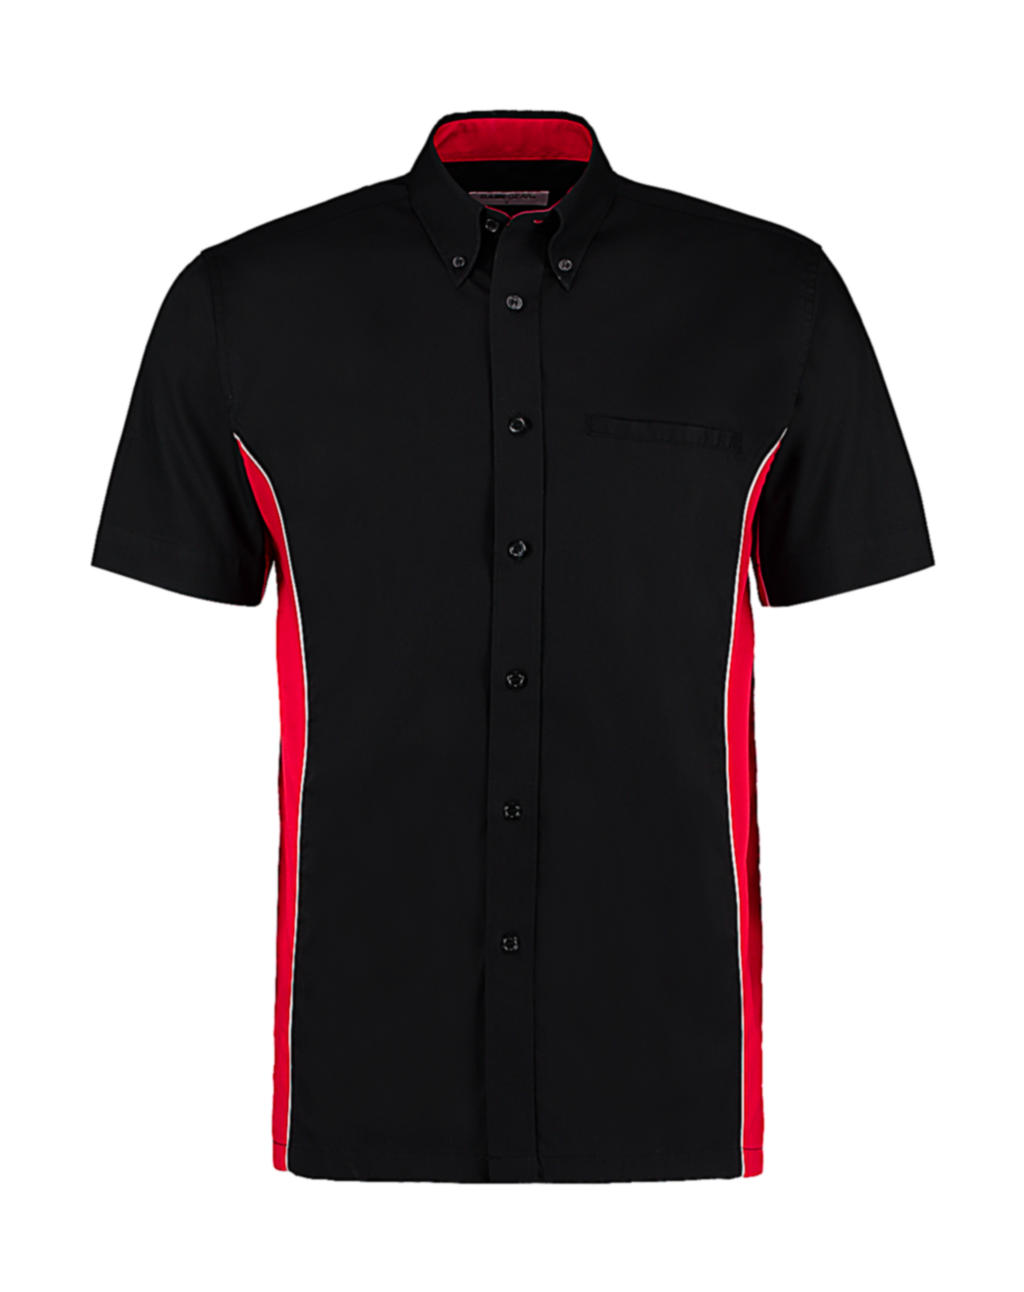  Classic Fit Sportsman Shirt SSL in Farbe Black/Red/White